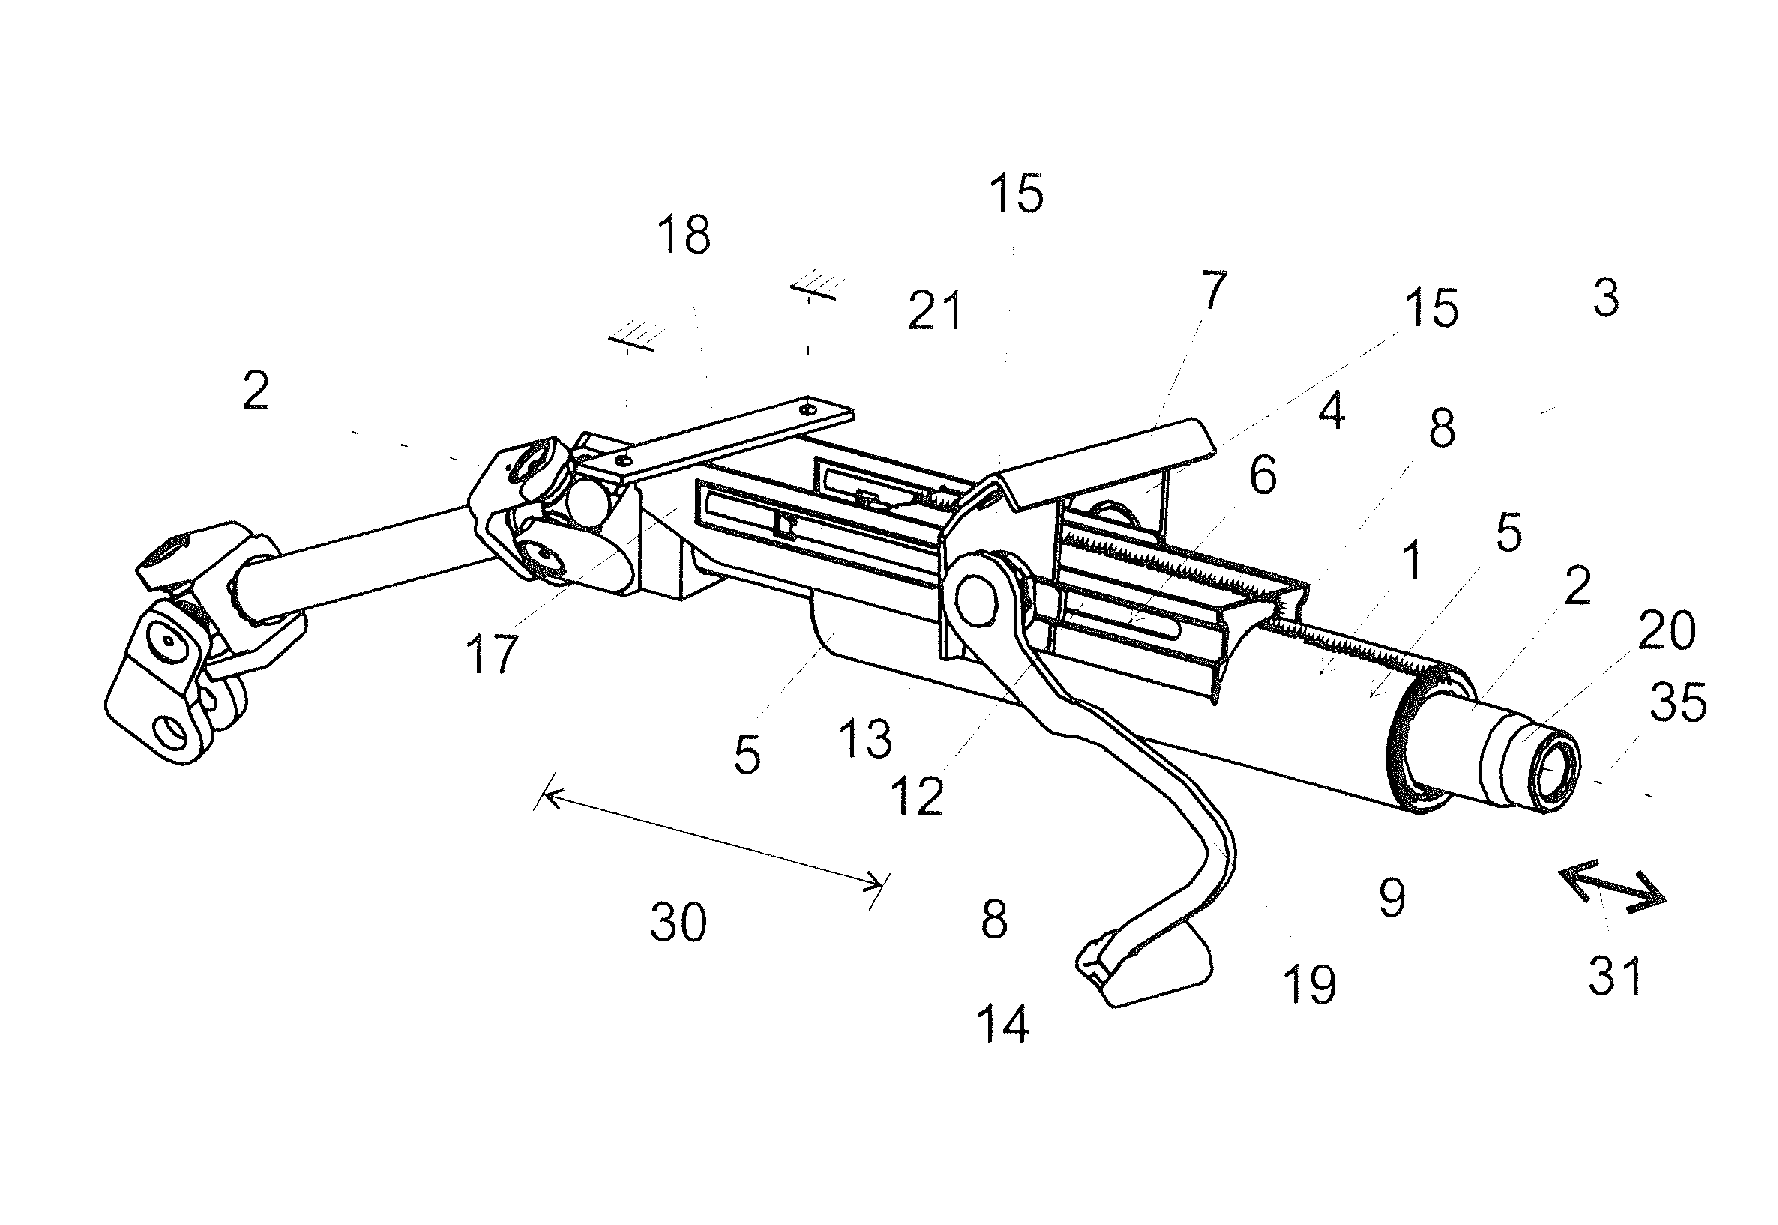 Steering shaft bearing unit for rotatably mounting a steering shaft